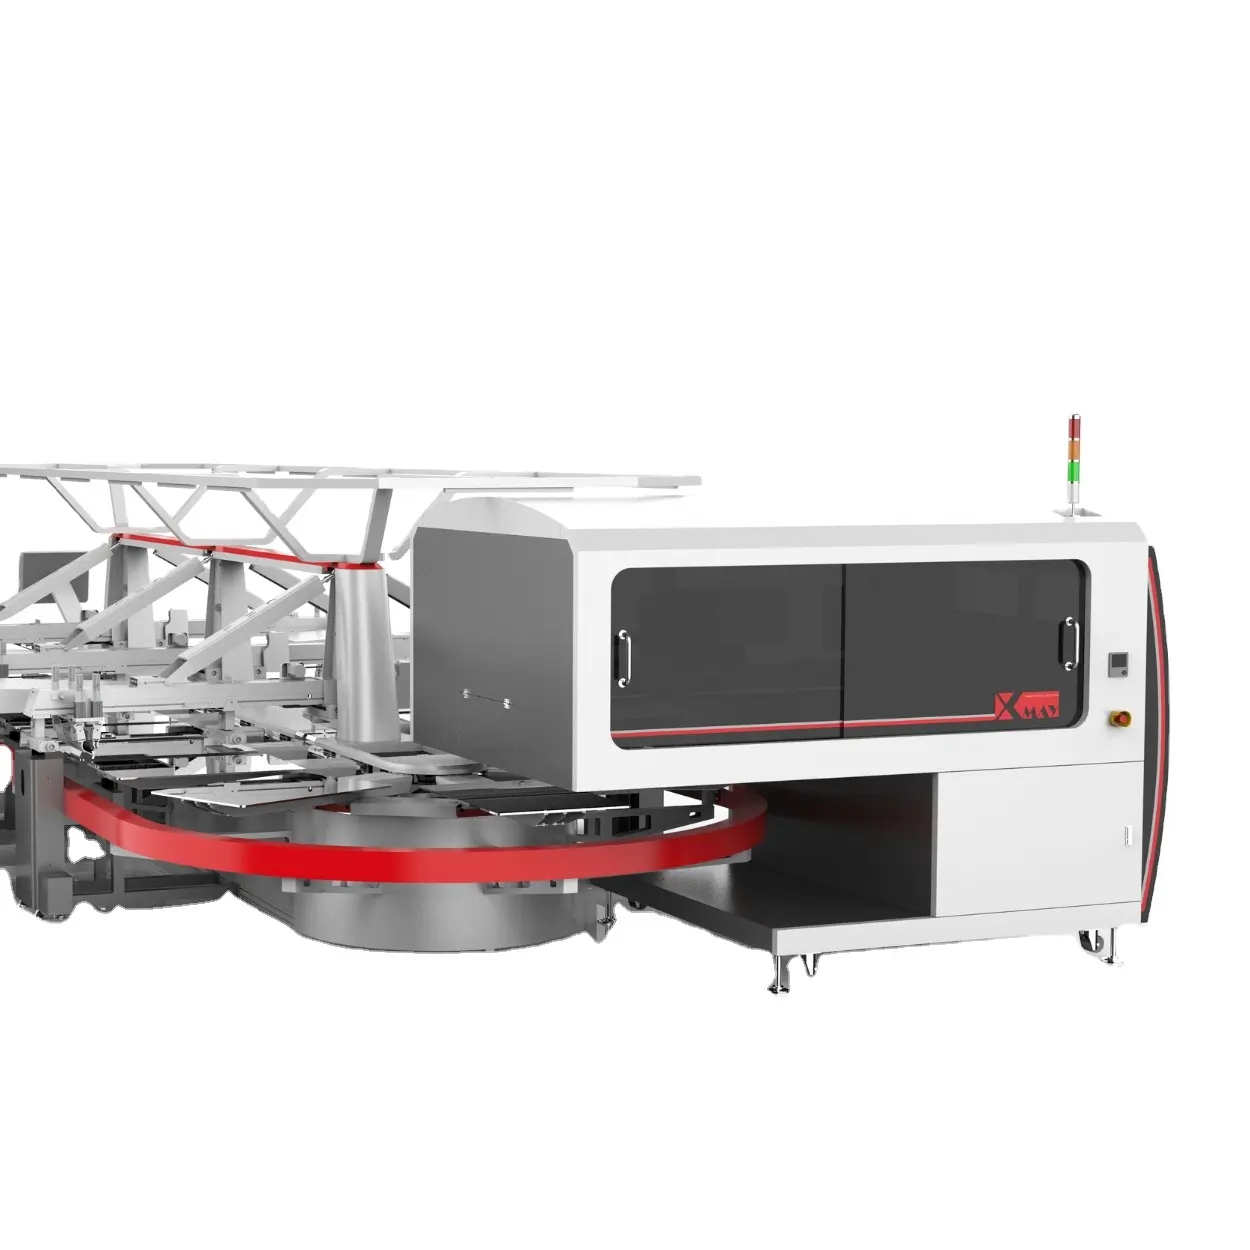 Xmay High quality automatic hybrid oval screen printer machine plus digital printer for textile screen printing industry